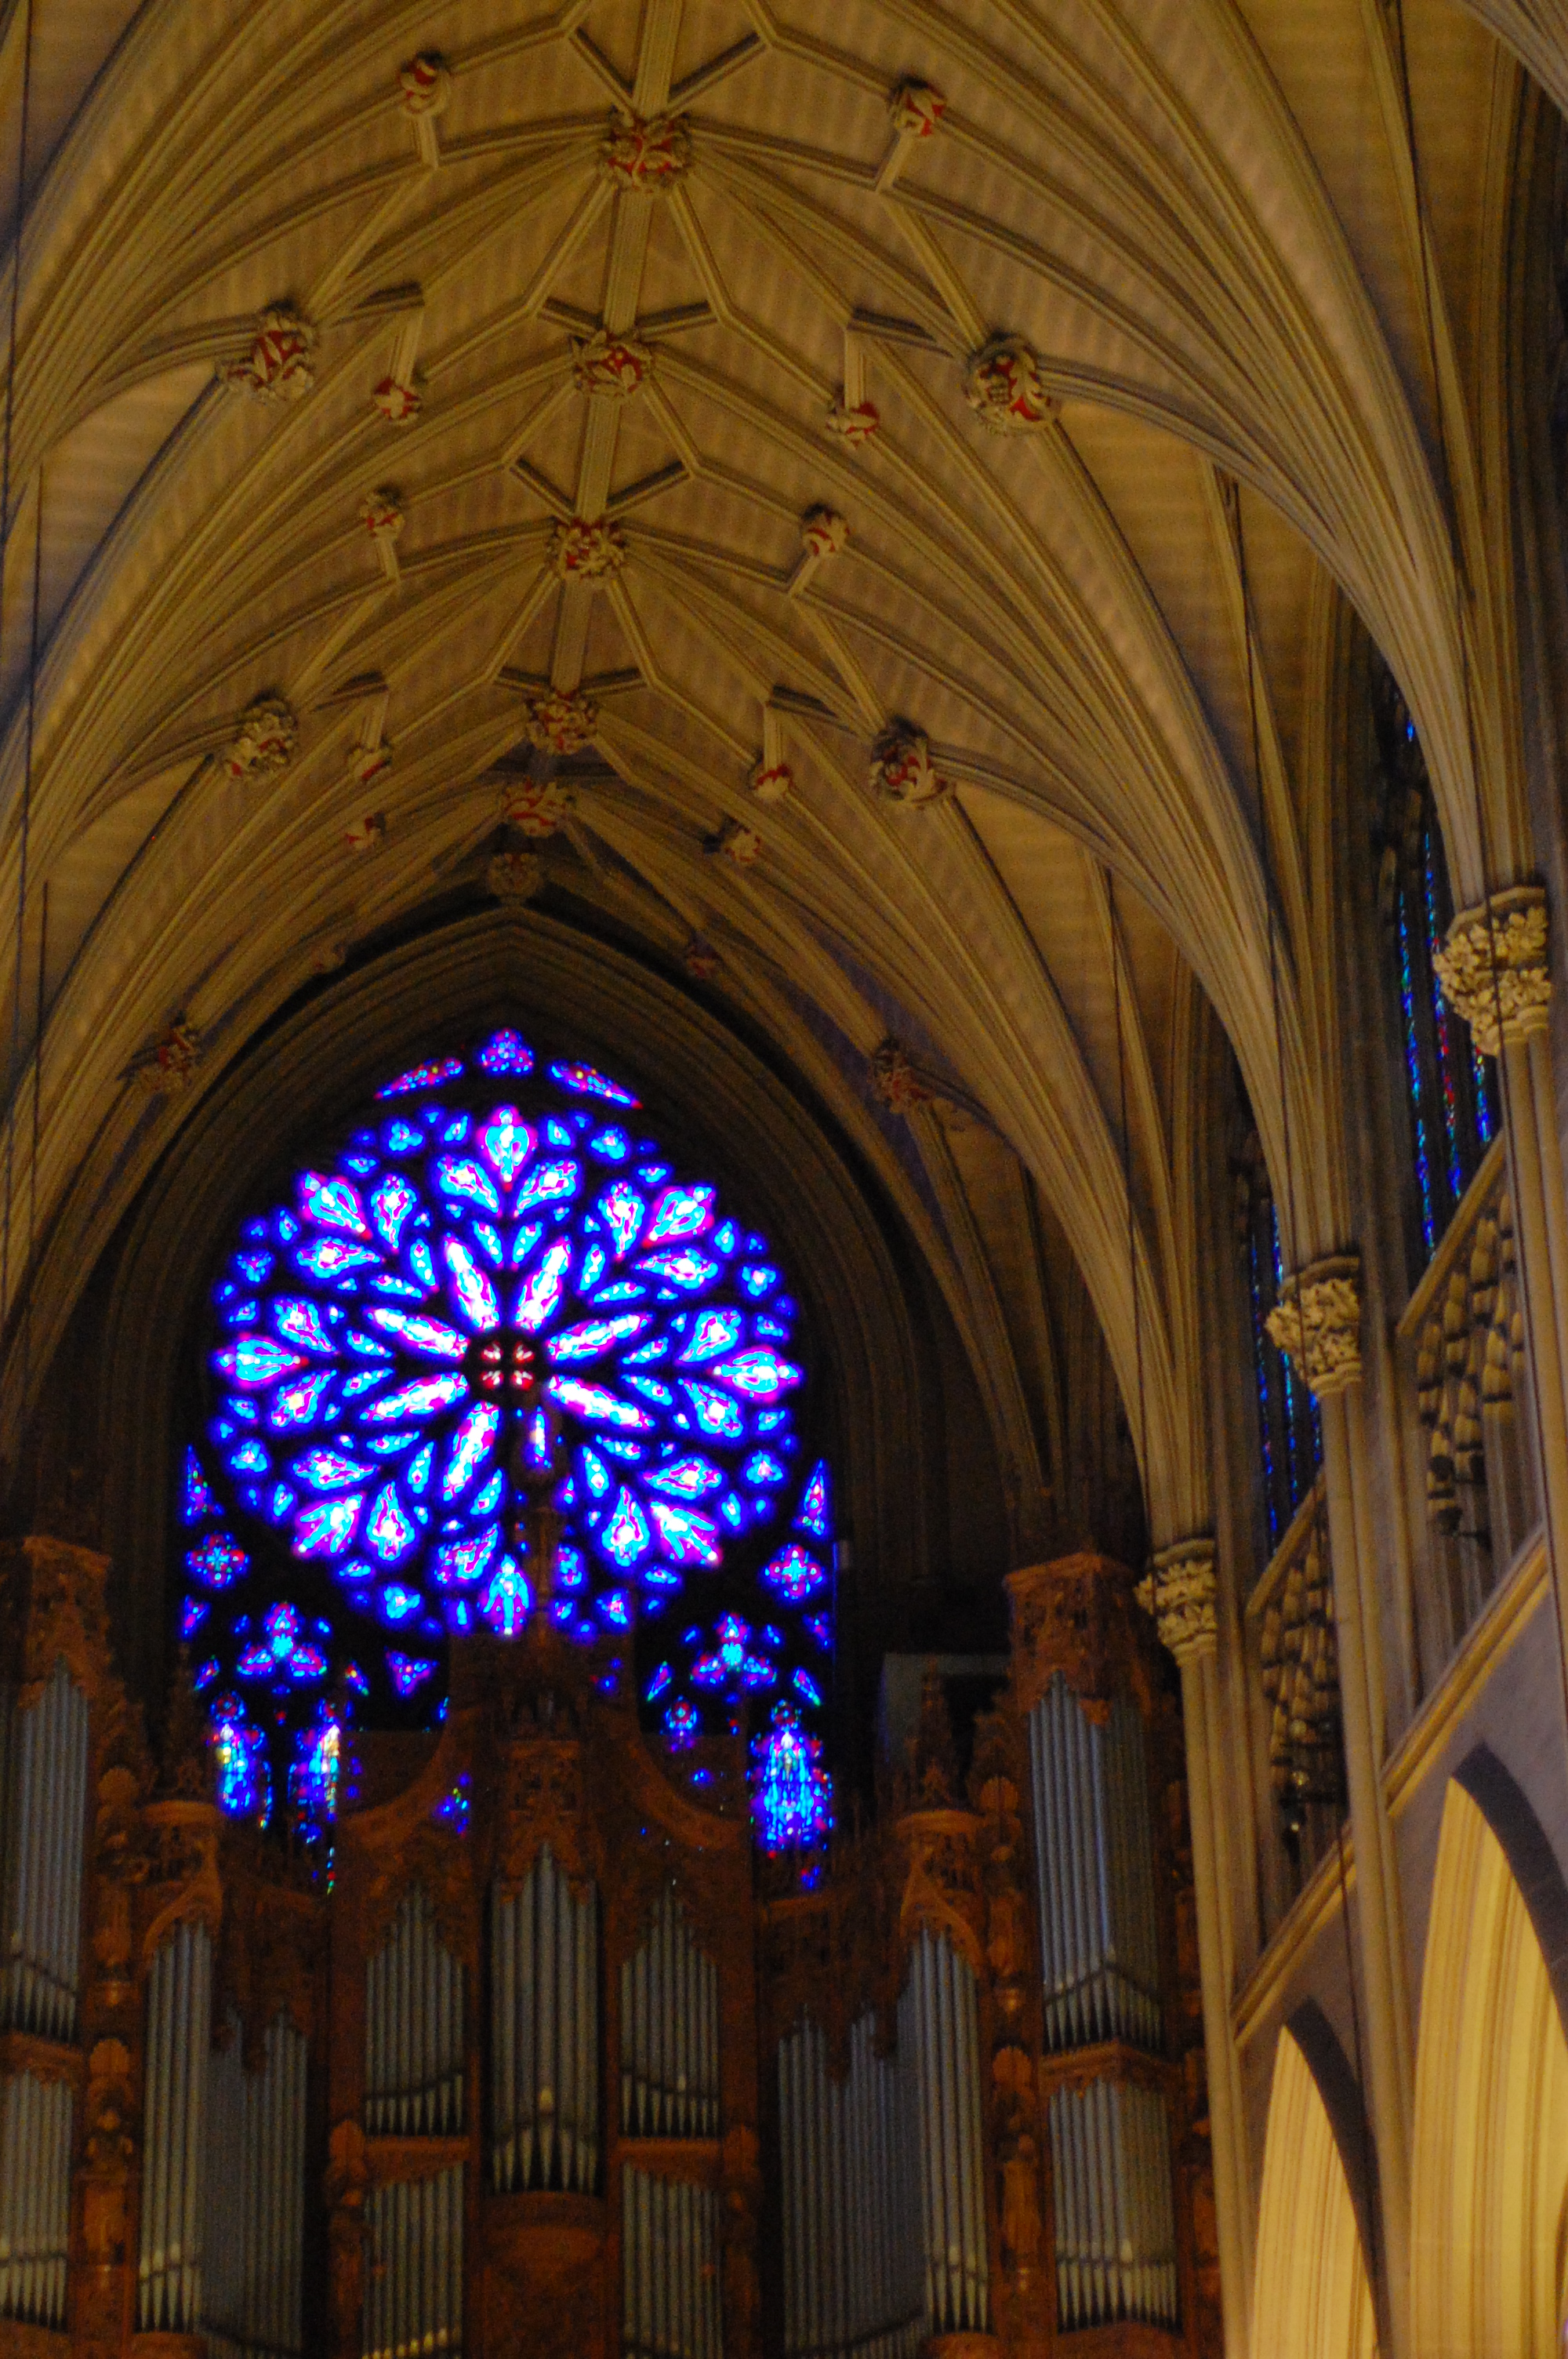 architecture, churches, stained glass - desktop wallpaper